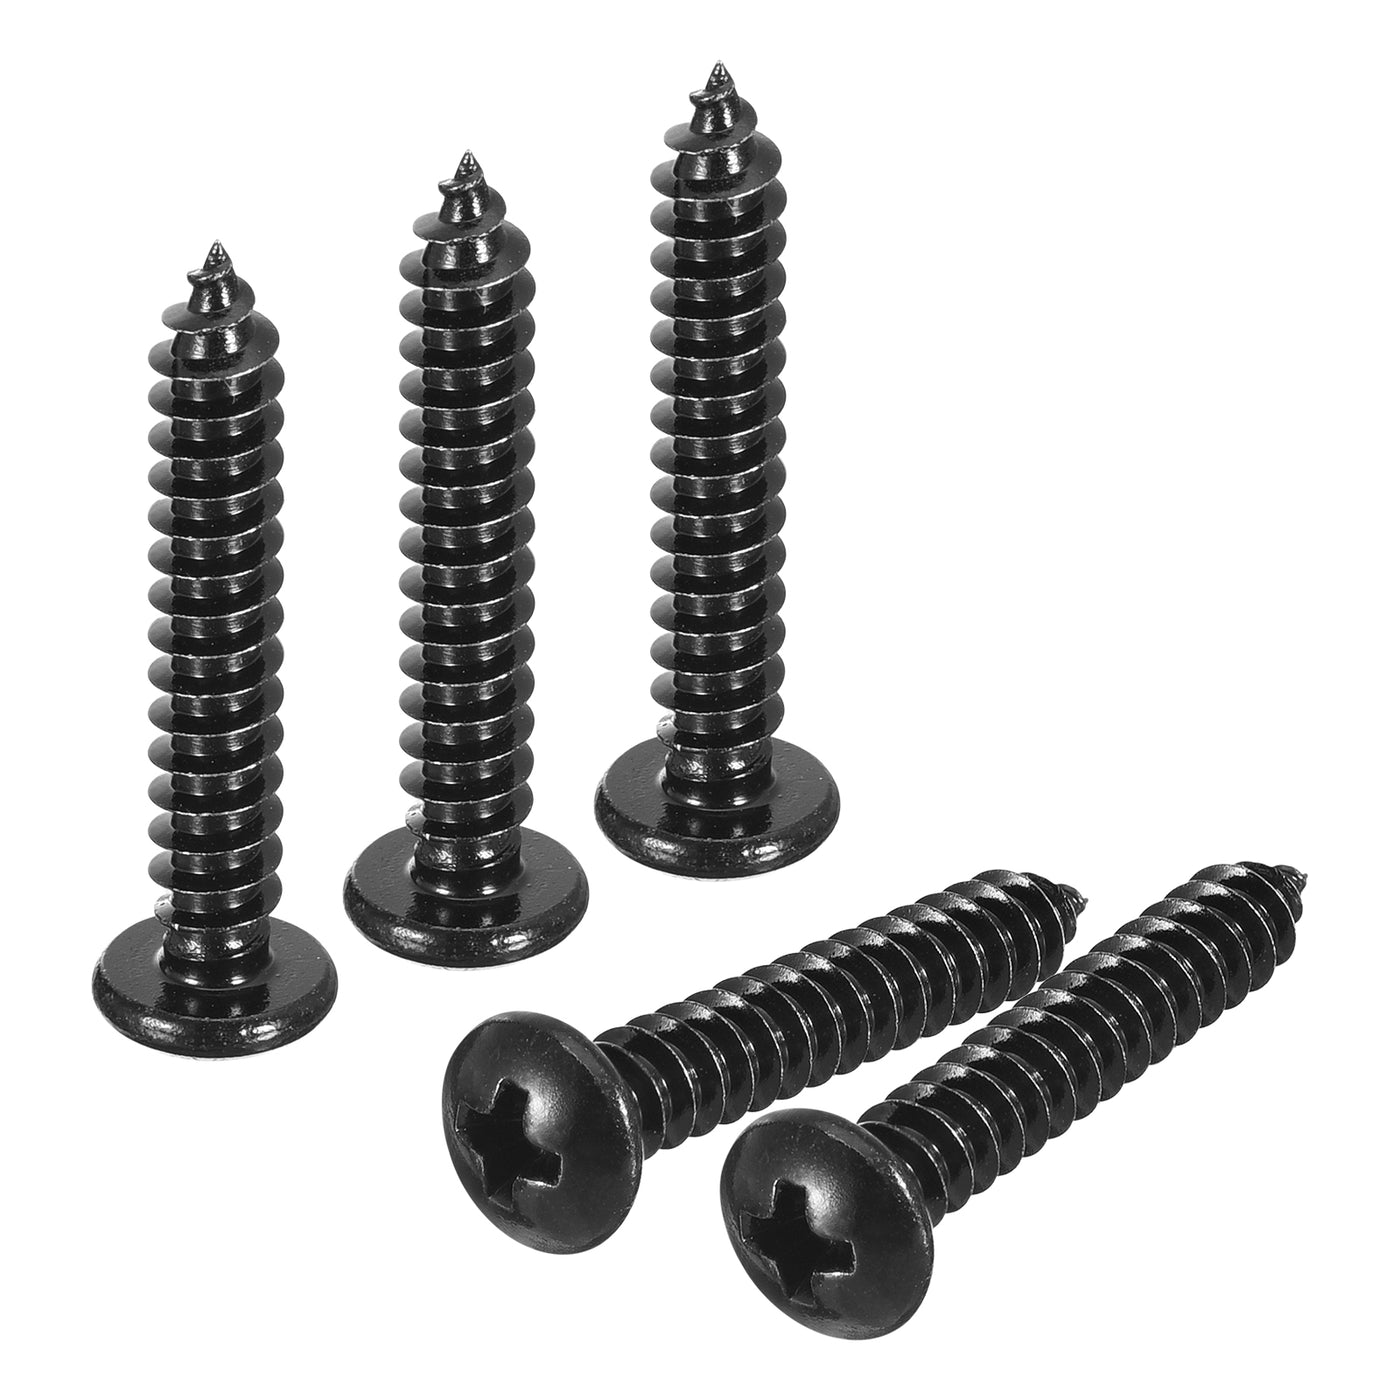 uxcell Uxcell 5mm x 30mm Phillips Pan Head Self-tapping Screw, 50pcs - 304 Stainless Steel Round Head Wood Screw Full Thread (Black)